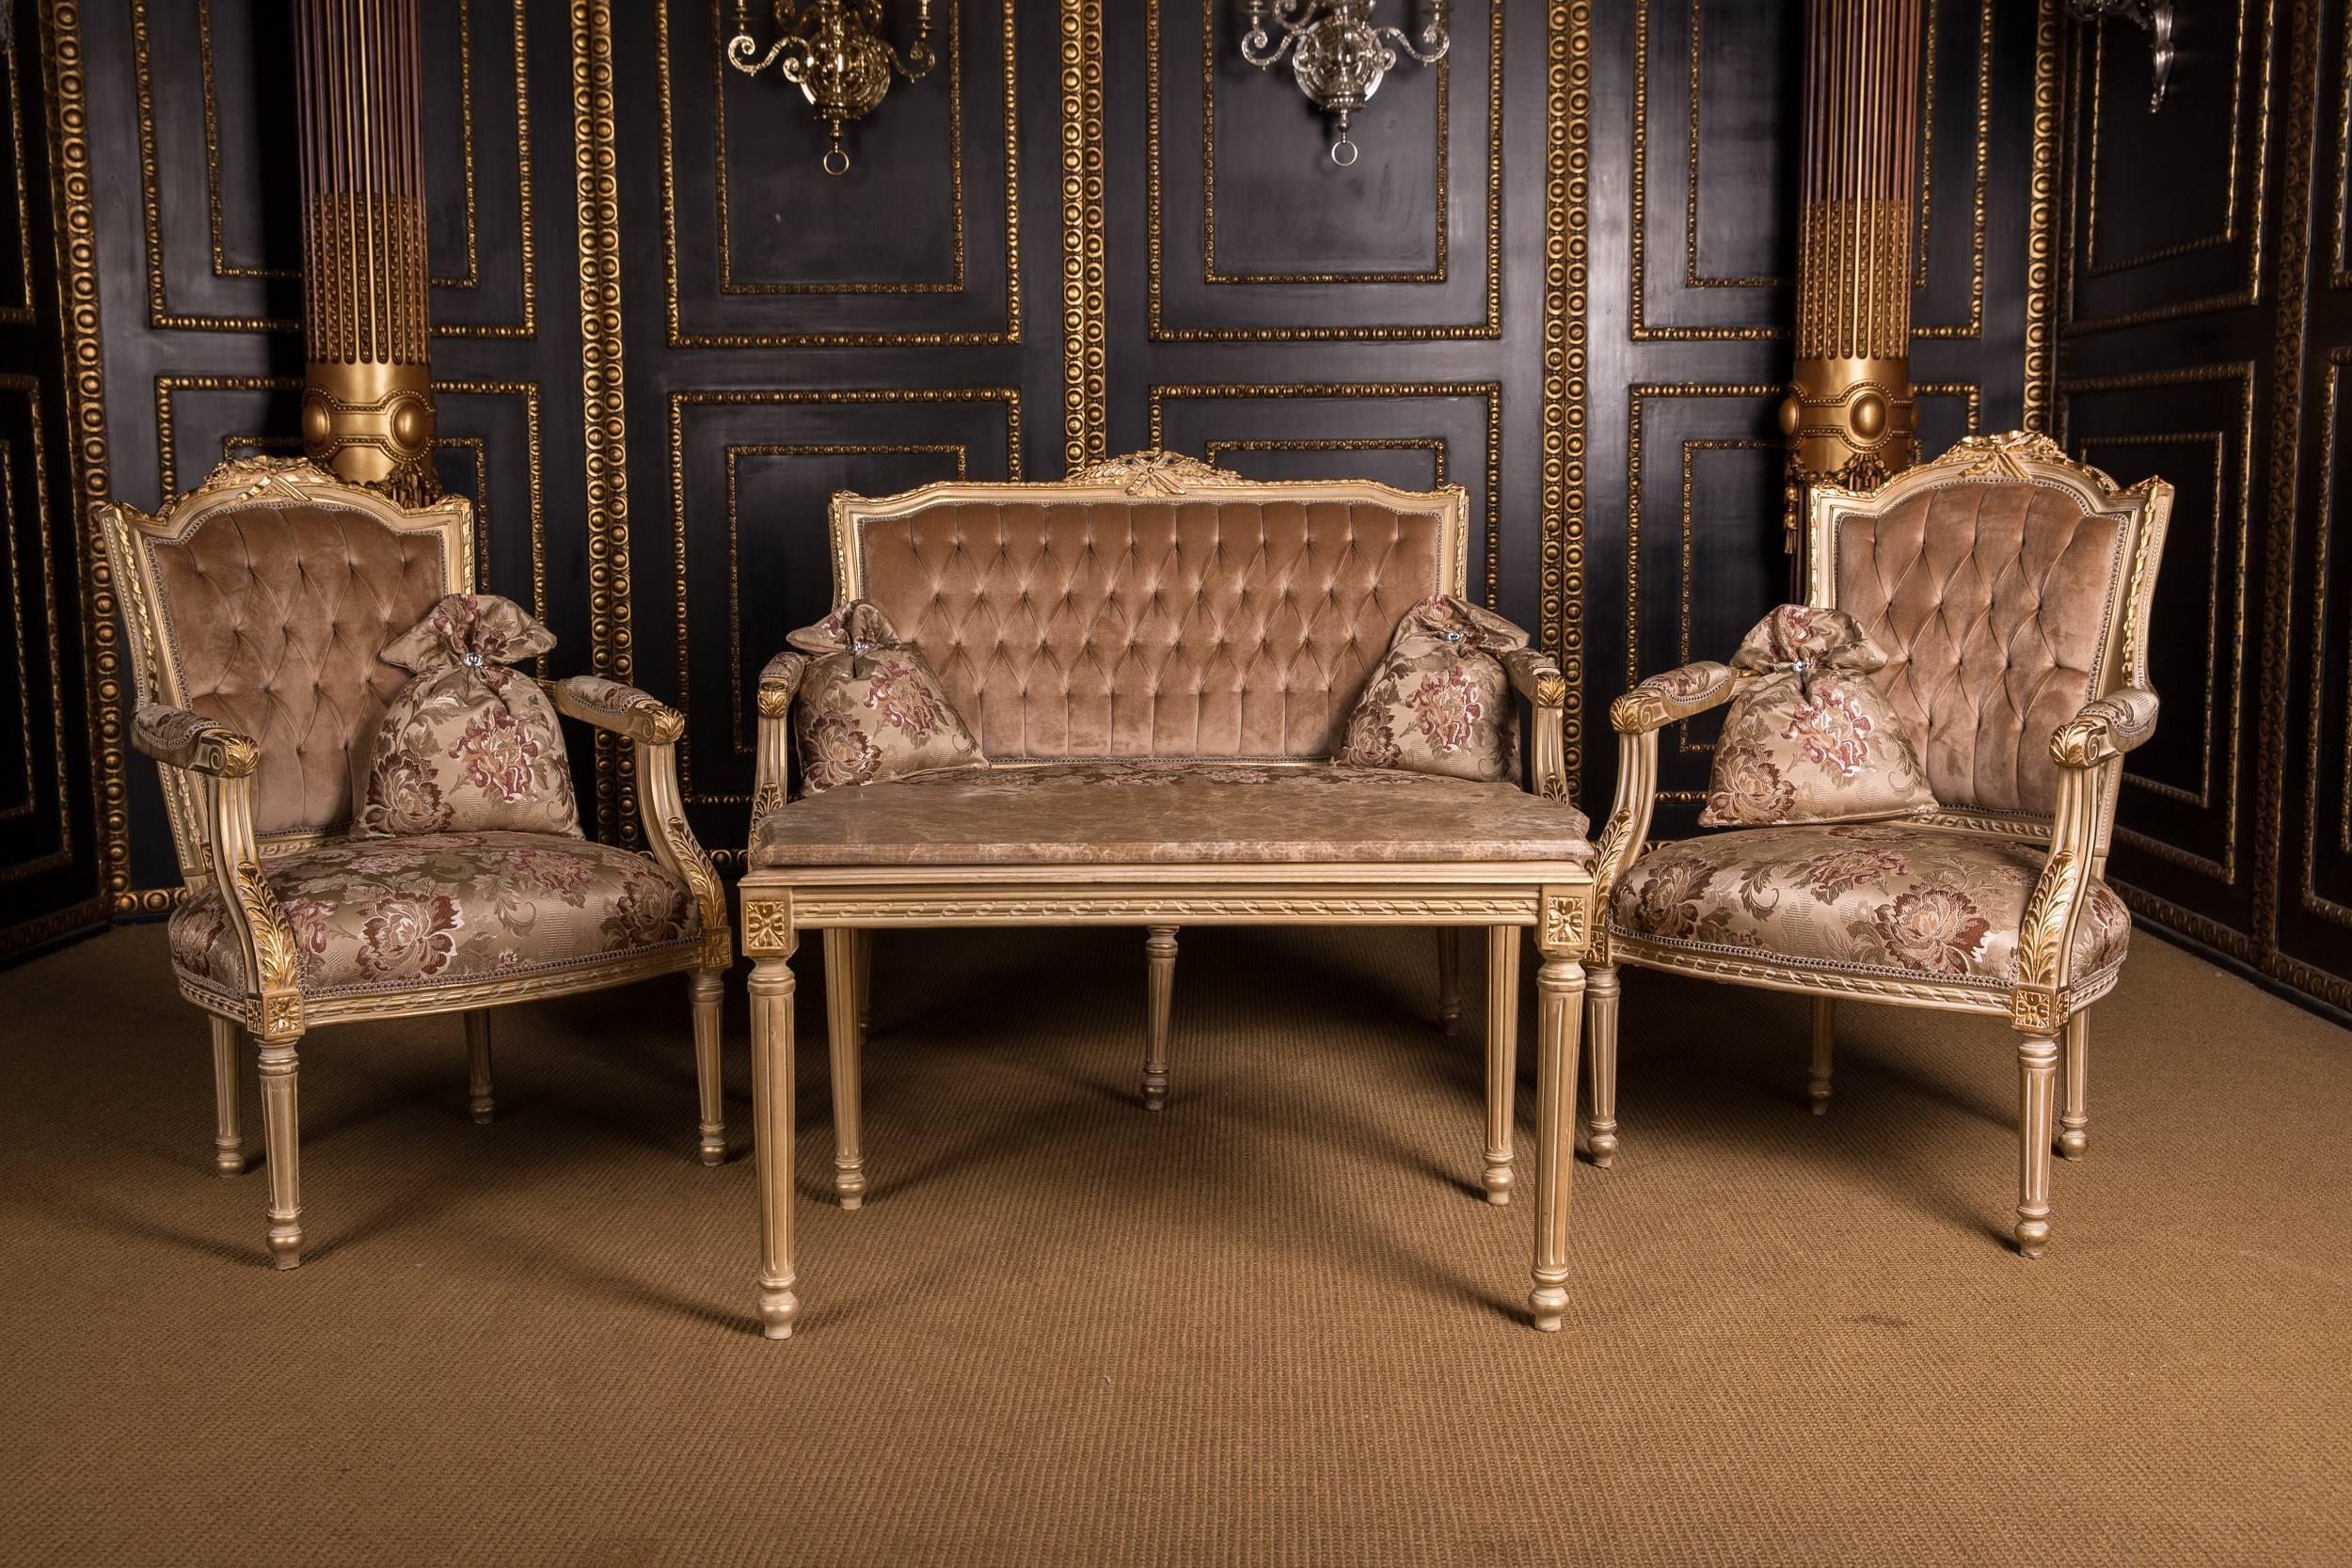 Louis XVI Classic French Seating Set Sofa and Two Armchairs in the Louis Seize Style